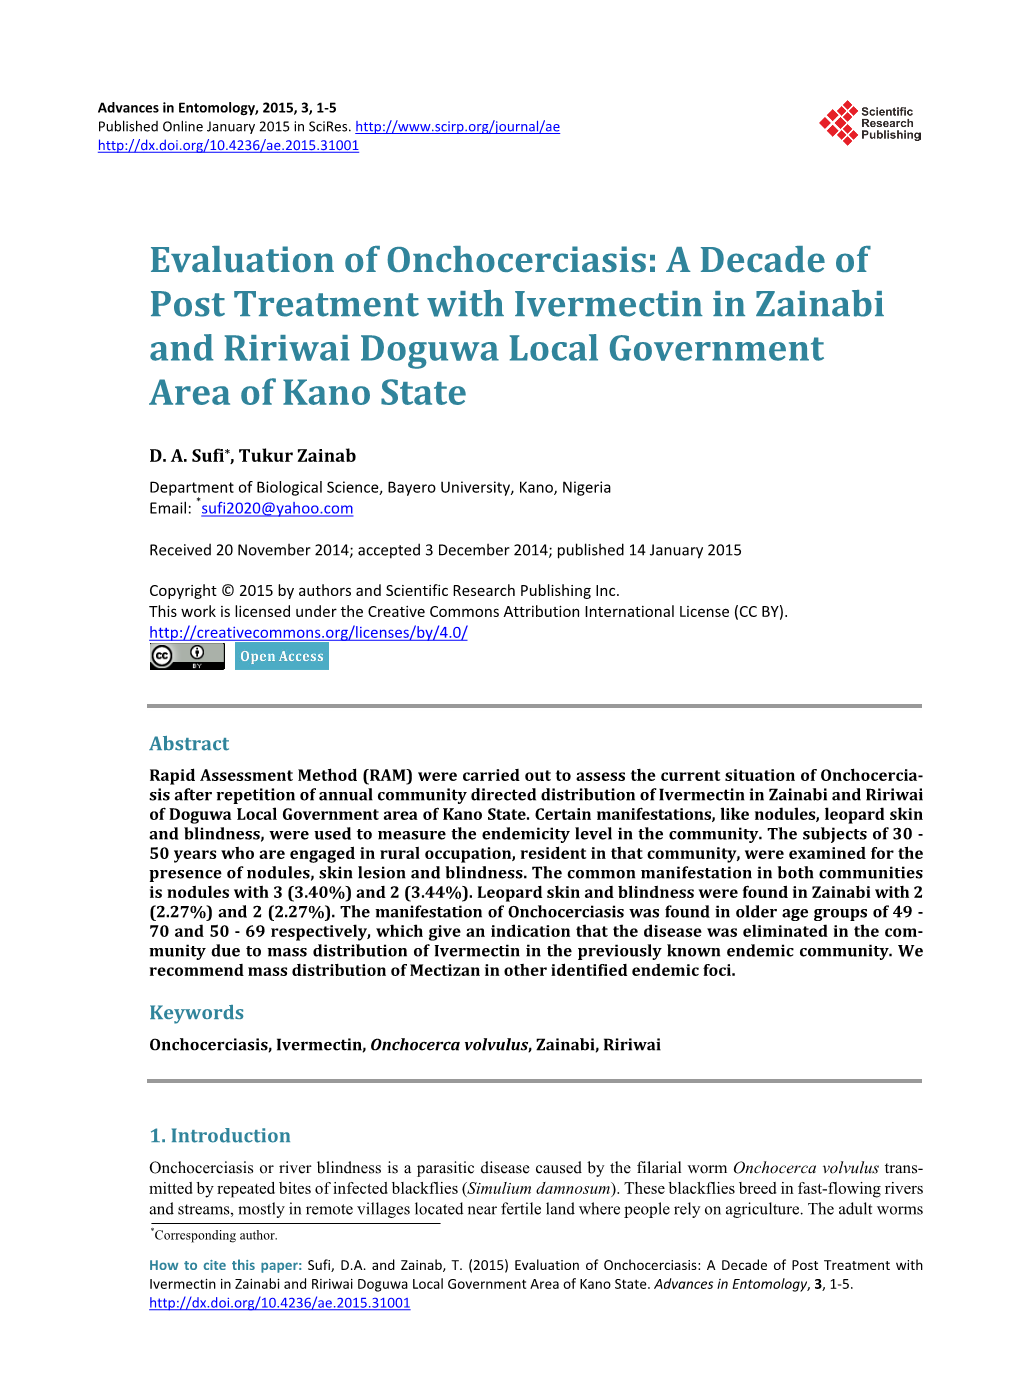 Evaluation of Onchocerciasis: a Decade of Post Treatment with Ivermectin in Zainabi and Ririwai Doguwa Local Government Area of Kano State